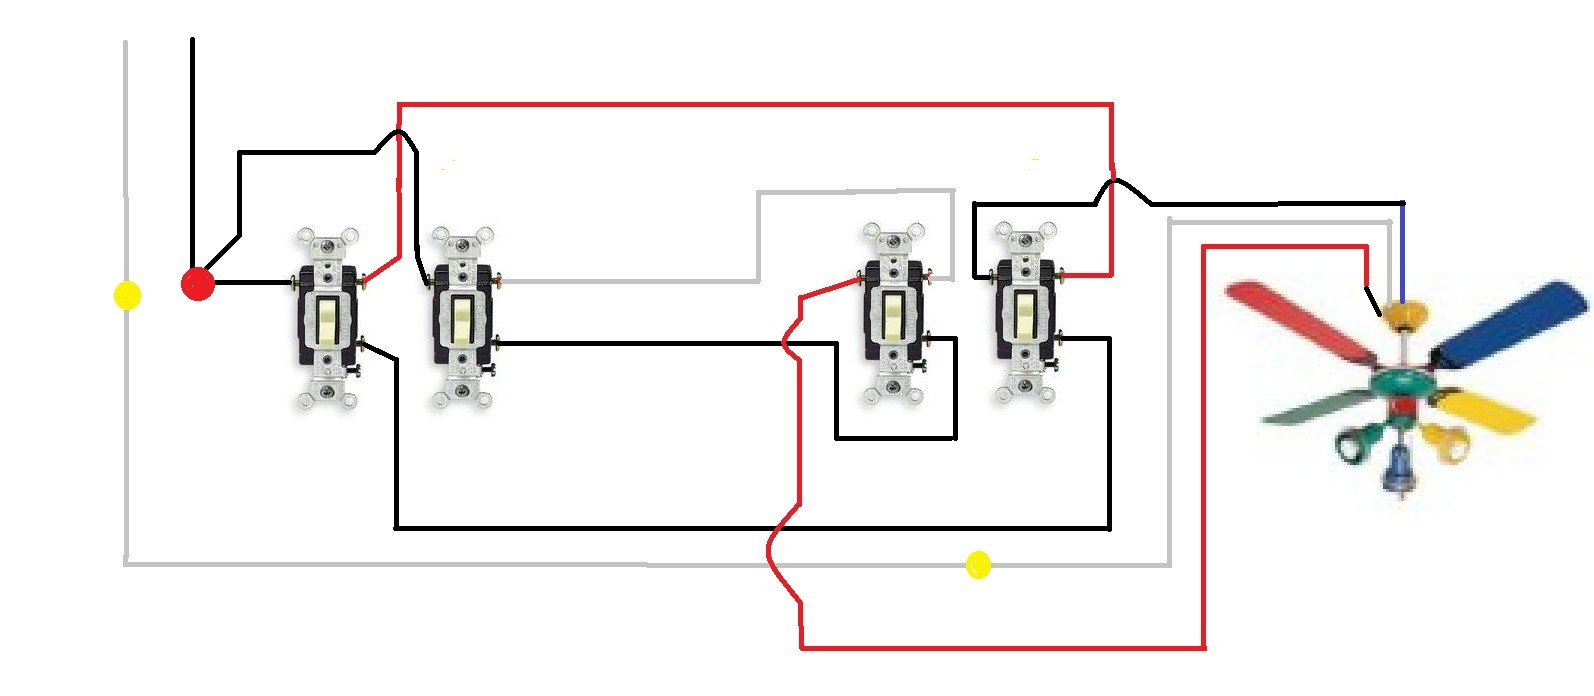 3 Way Switch Diagram Need Help Wiring Ceiling Fan With 4 3way Switches Wiring Diagrams Show